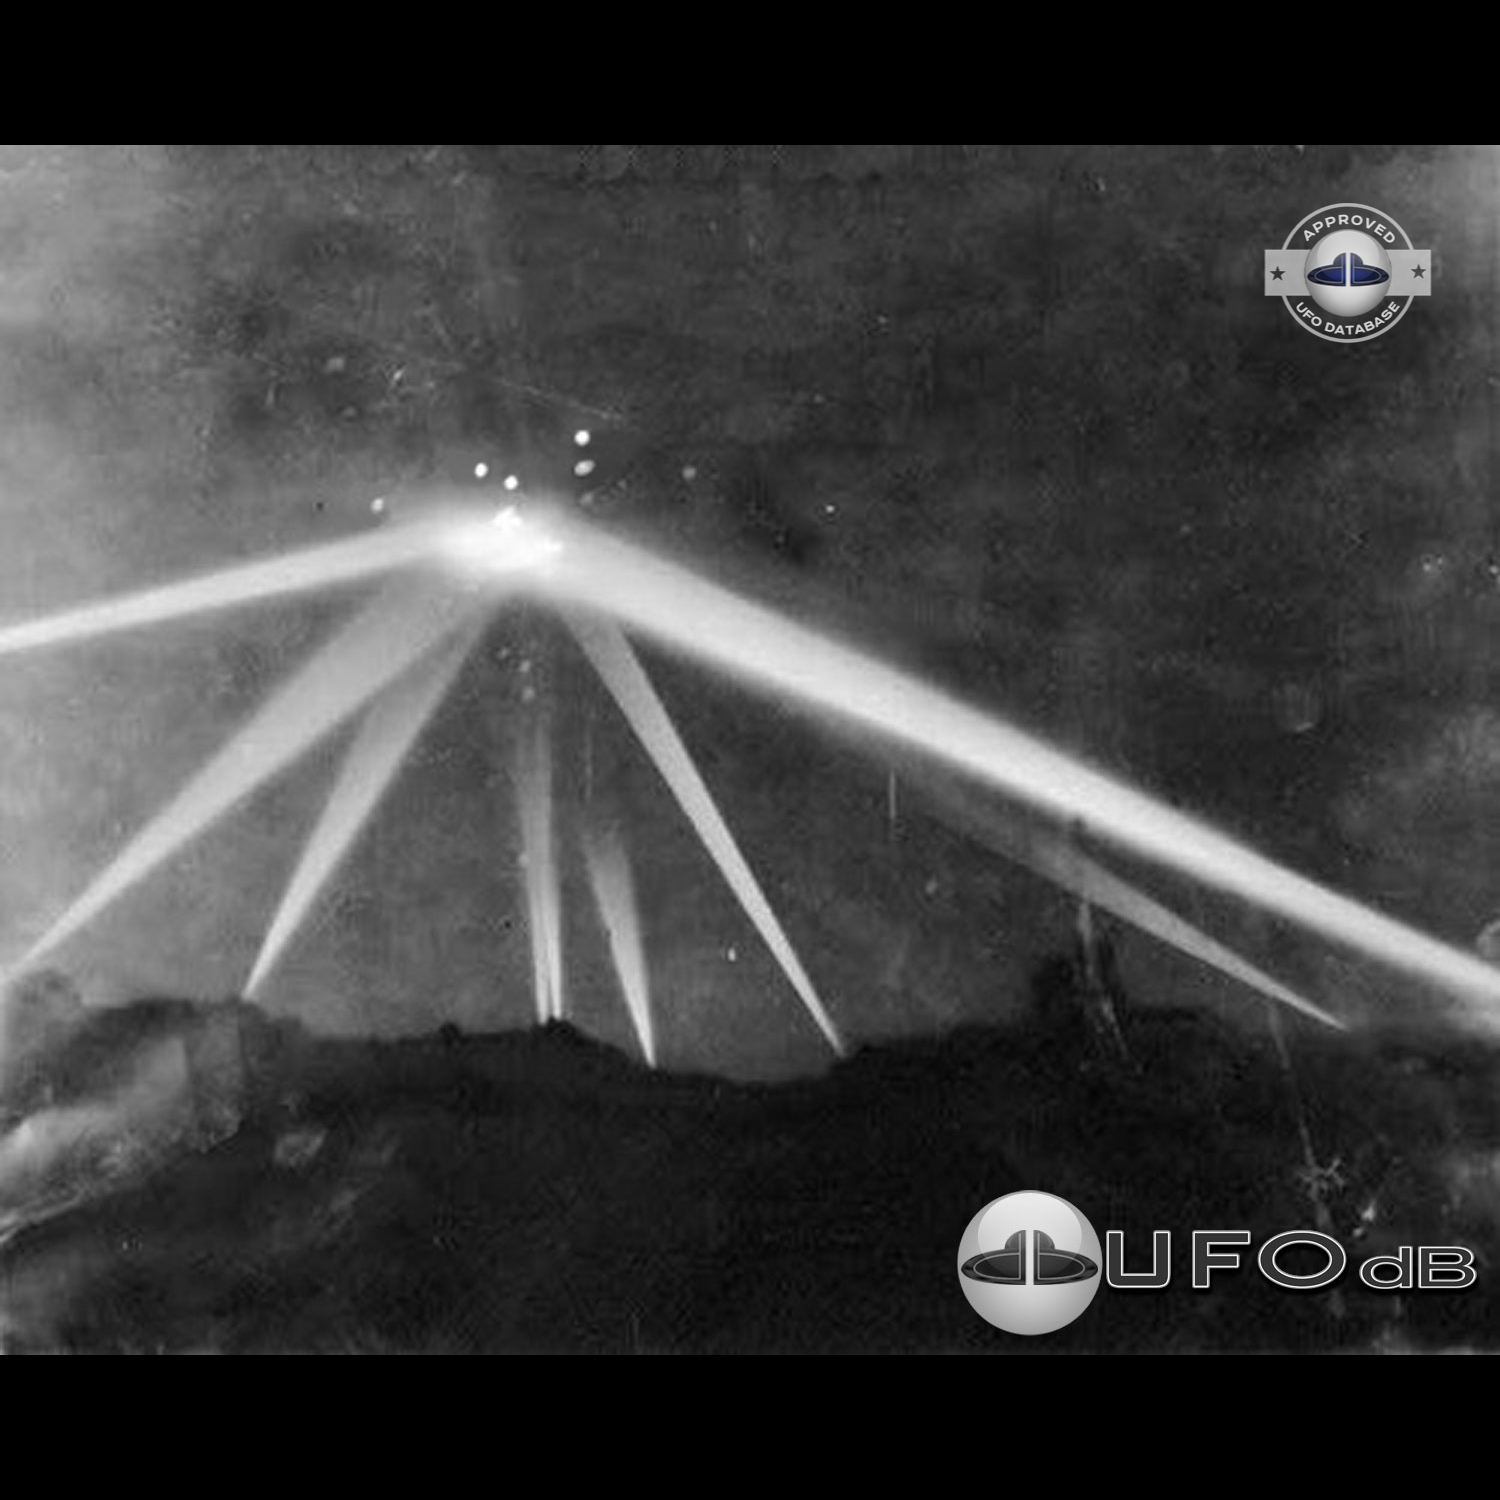 37th Coast Artillery Brigade lit up their spotlights to find a big UFO UFO Picture #109-1